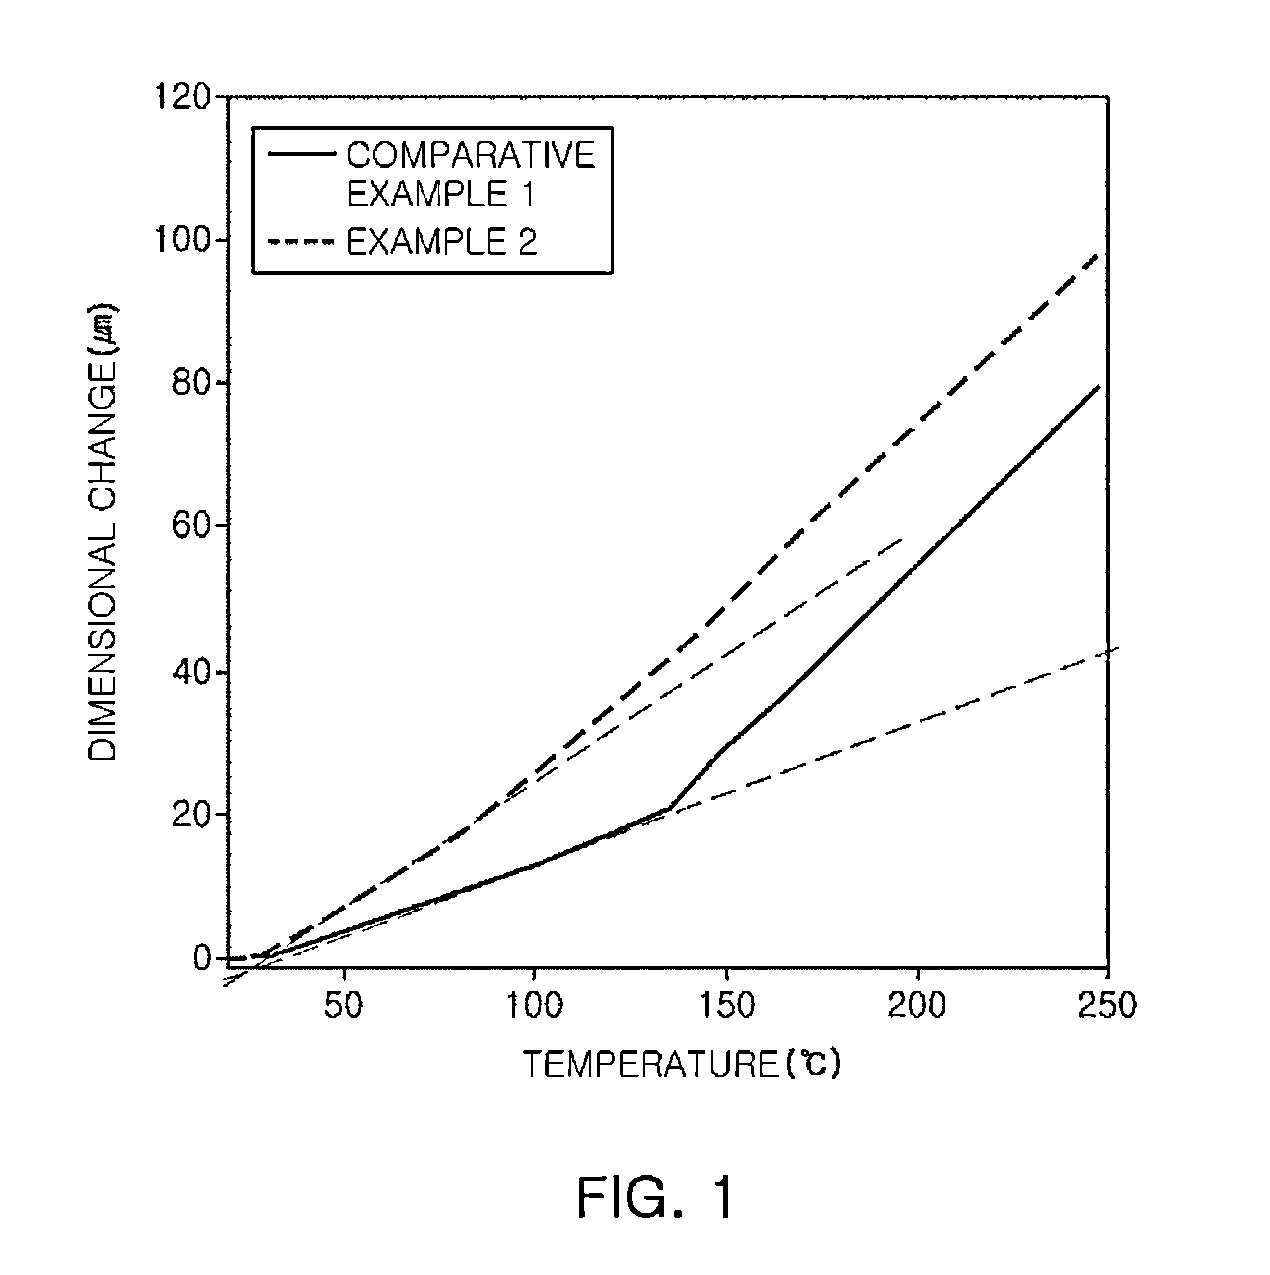 Epoxy compound having alkoxysilyl group, method of preparing the same, composition and cured product comprising the same, and uses  thereof